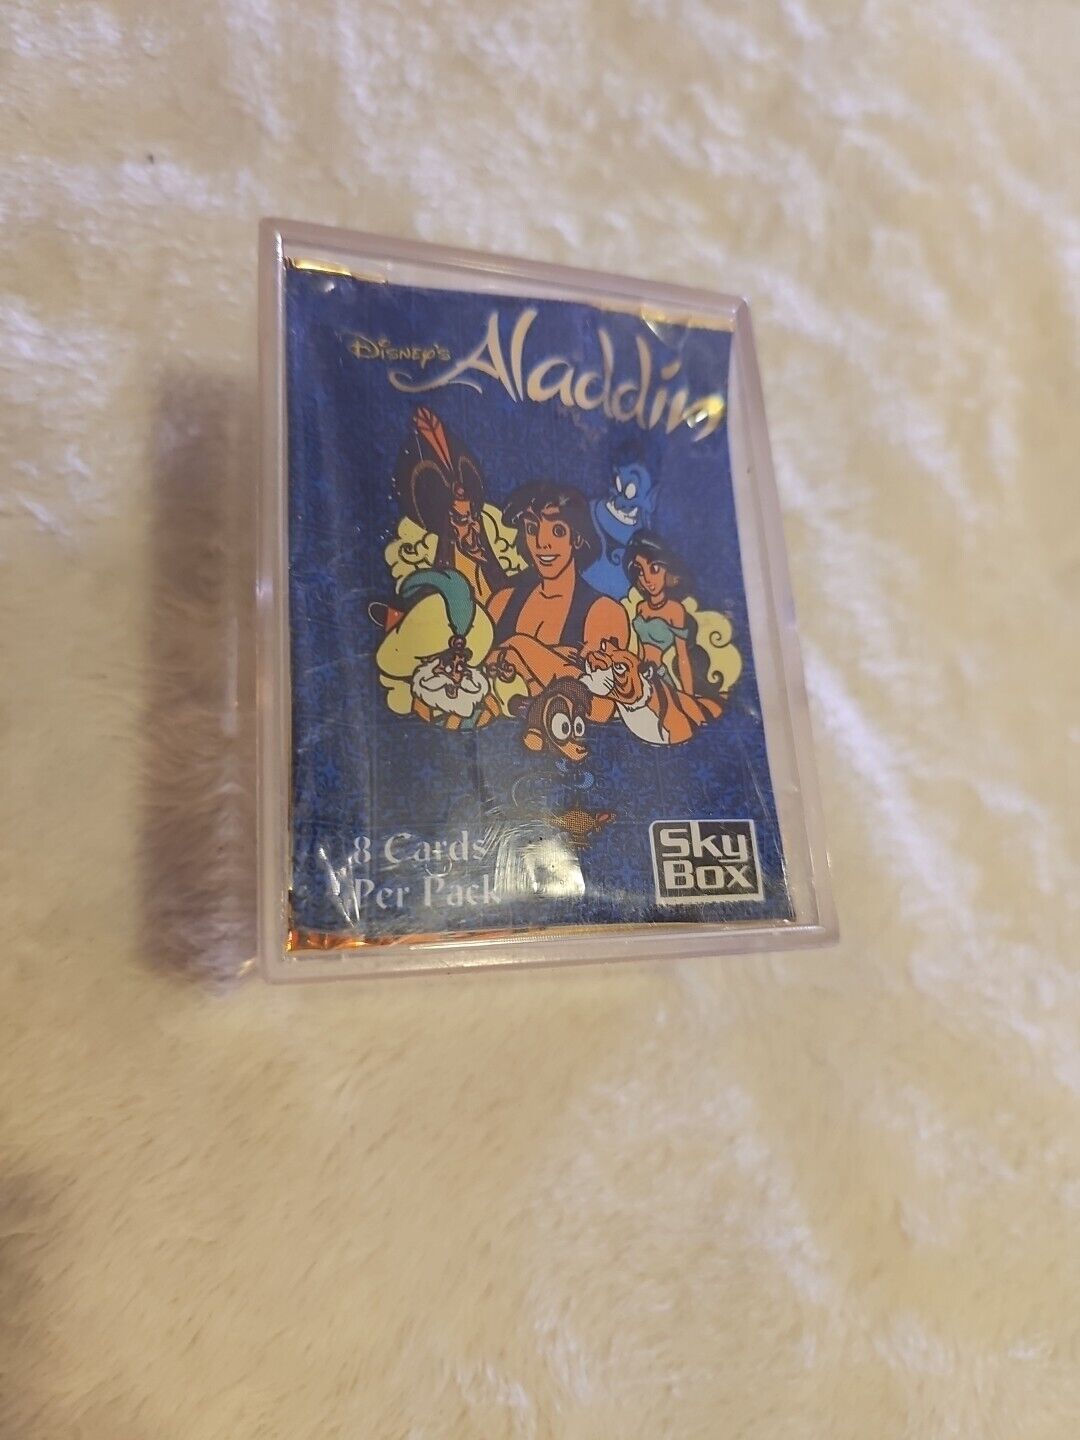 DISNEY'S ALADDIN * 1993 SKYBOX * COMPLETE  90 CARD SET with Wrapper - Mint